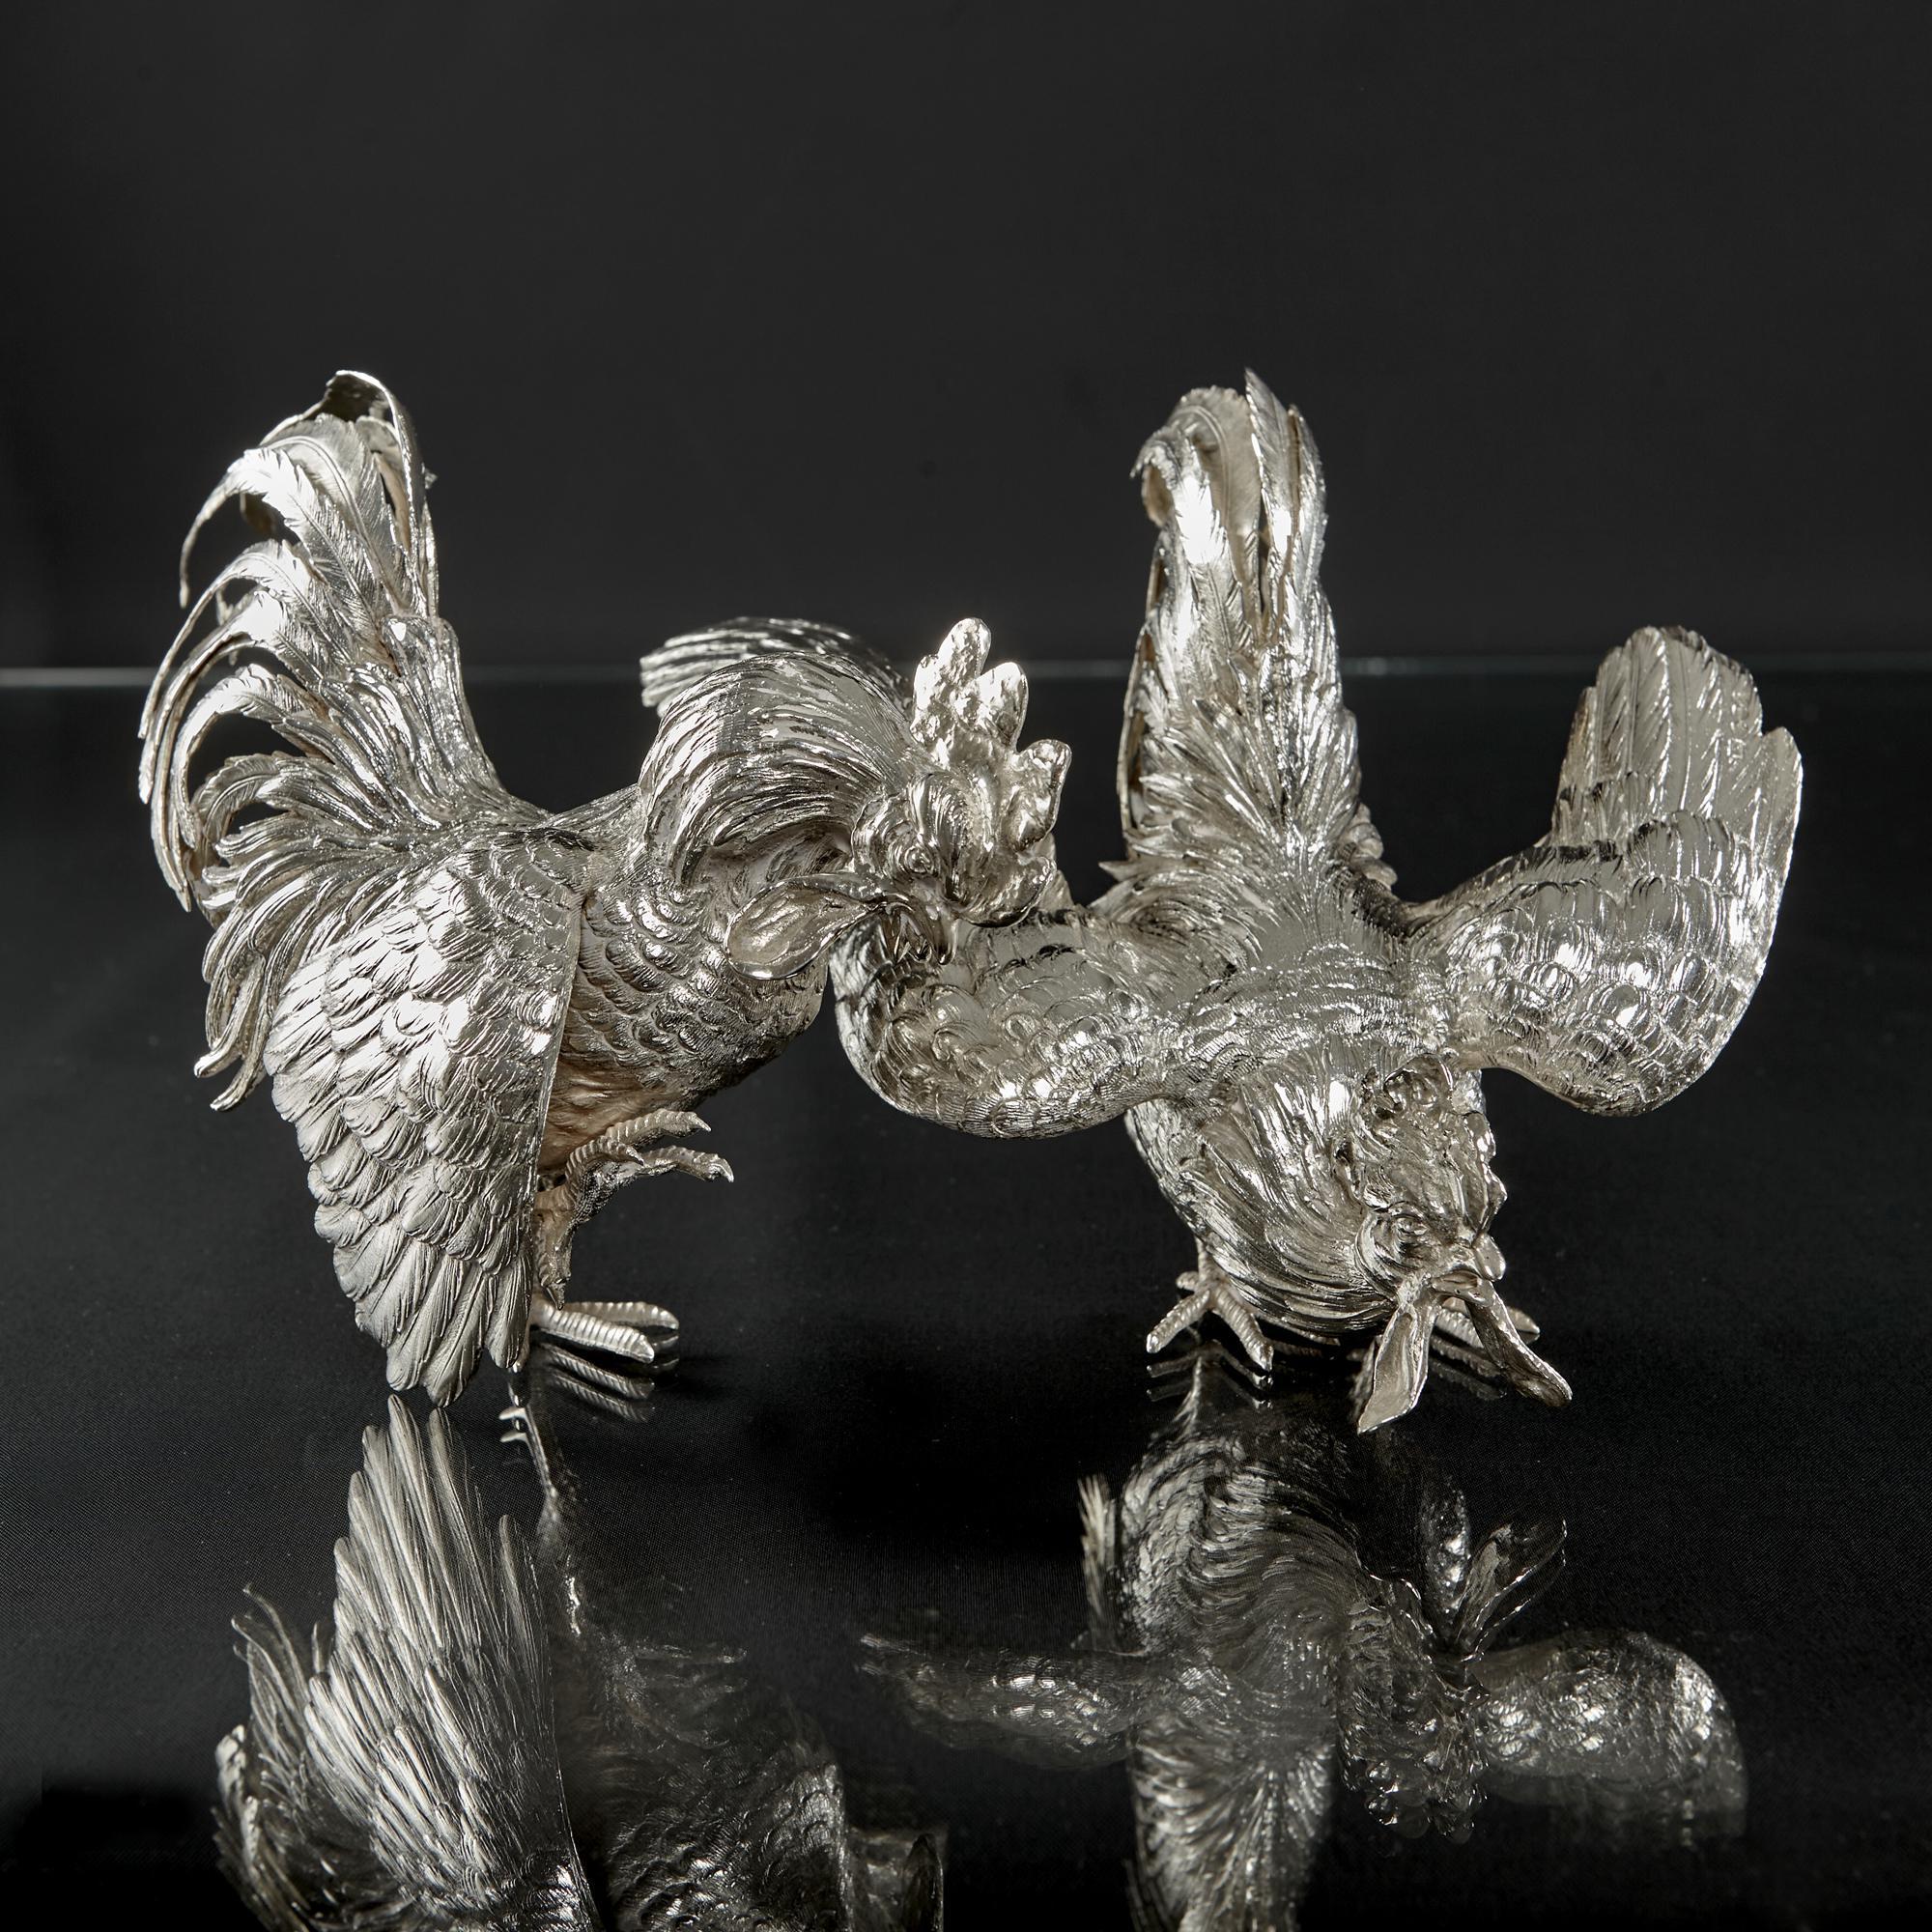 Pair of heavy quality cast silver cockerels in the traditional fighting pose. They are wonderfully modelled with a high attention to detail giving a lively and lifelike appearance. The tail feathers are individually hand cut and engraved to add an